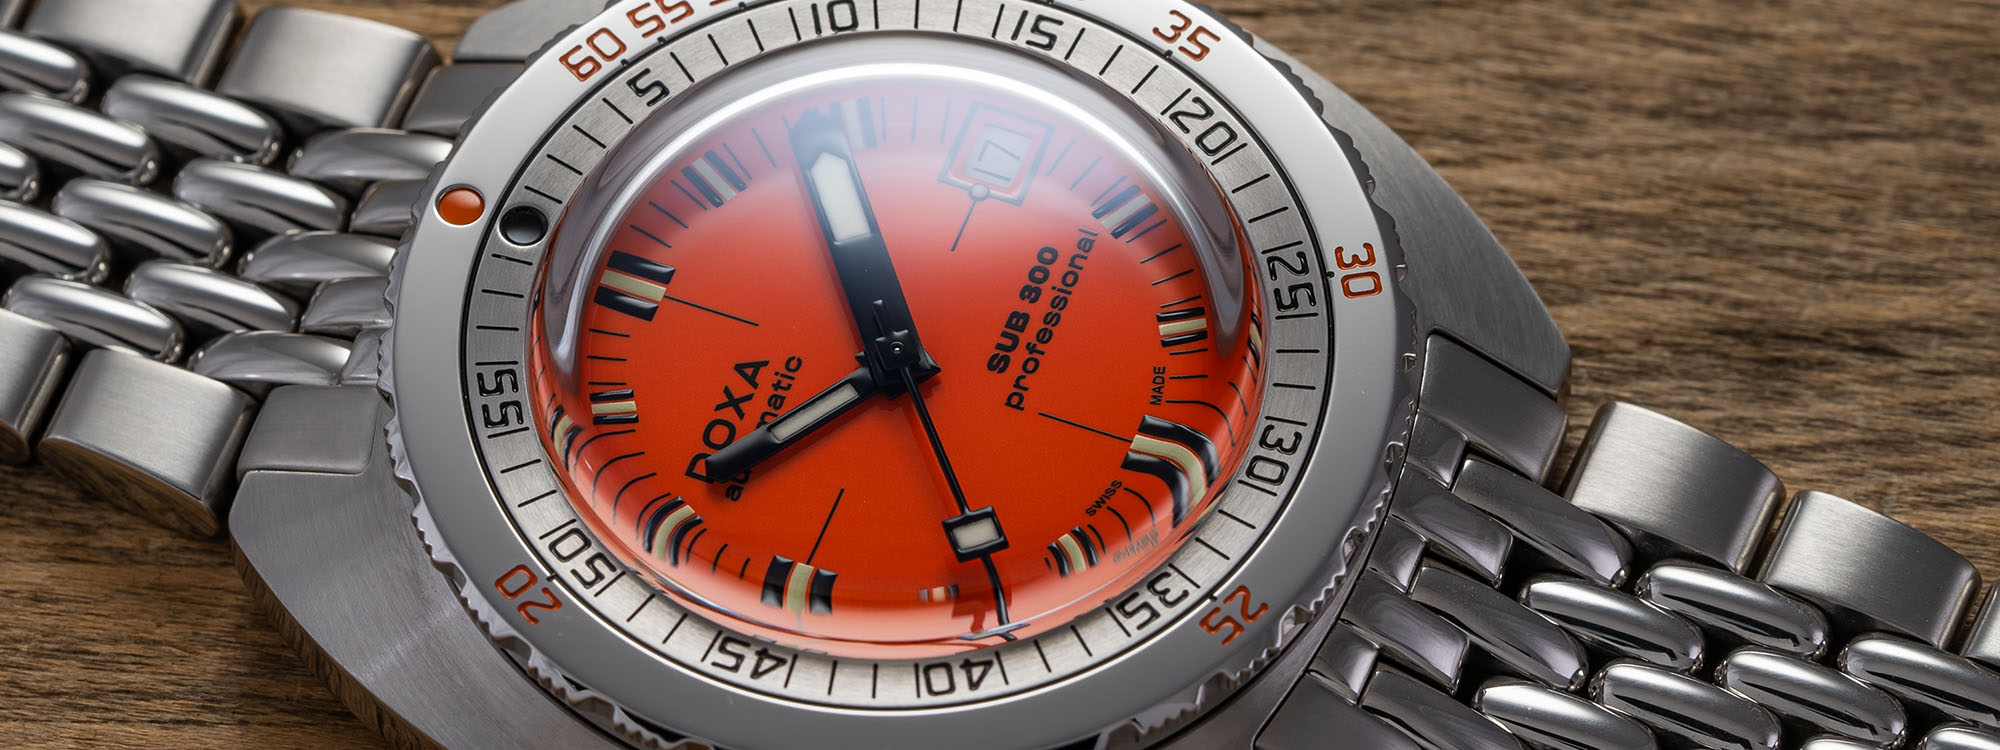 Doxa Sub Review: The Iconic Dive Watch You Should Know More About